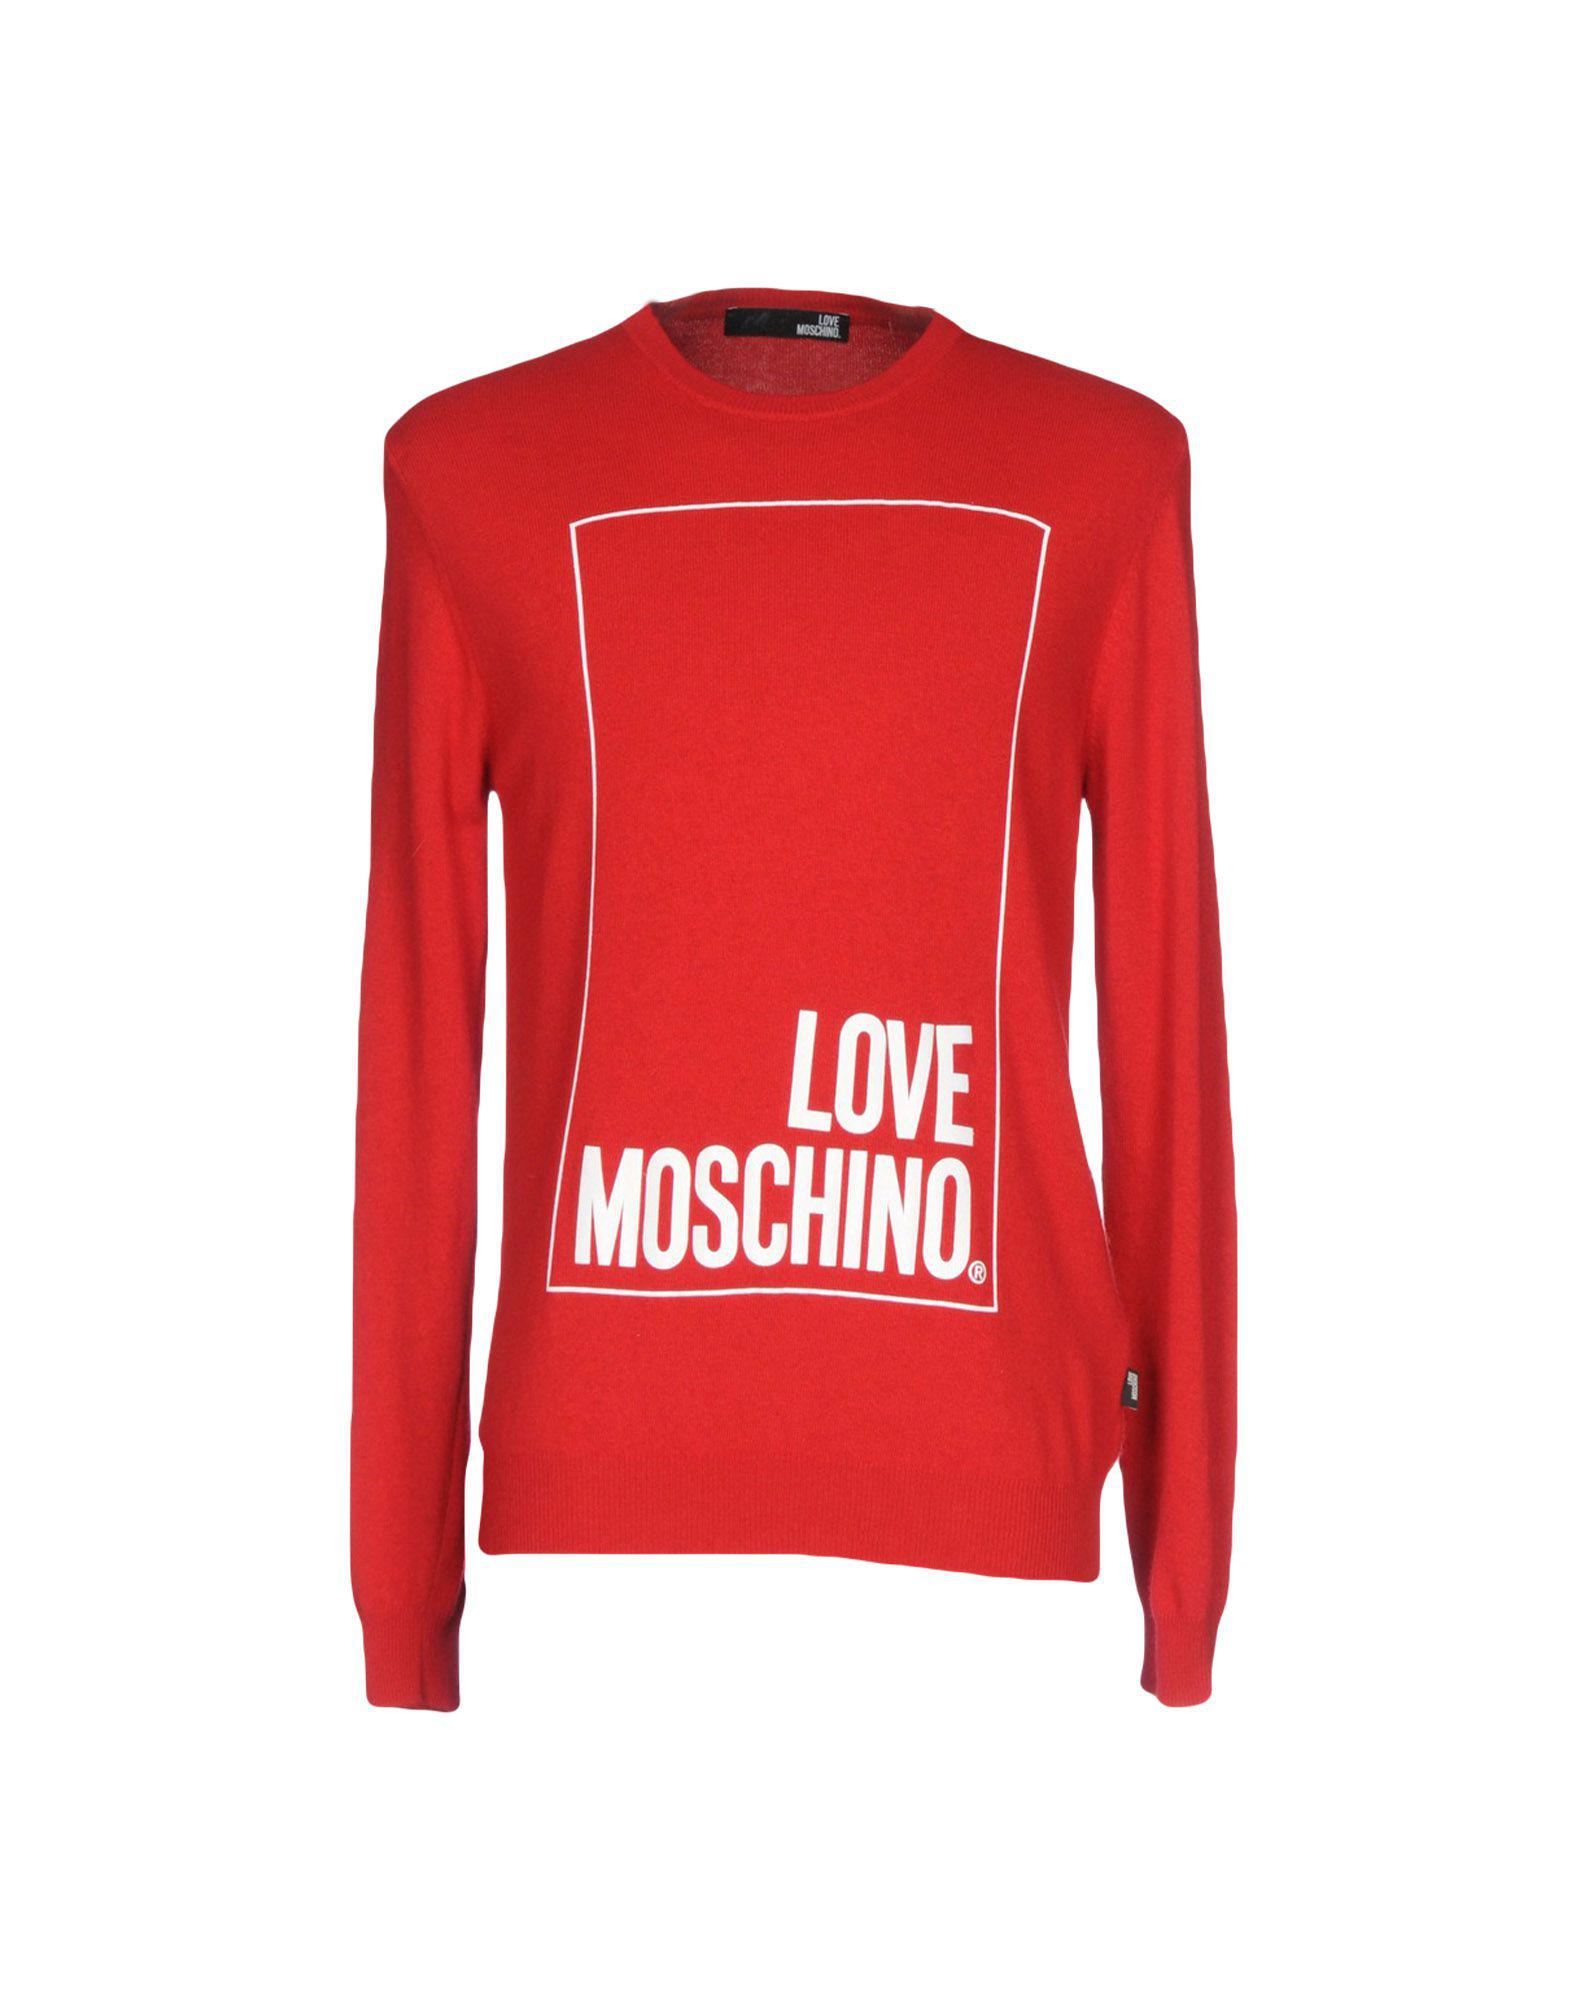 Lyst - Love Moschino Jumper in Red for Men